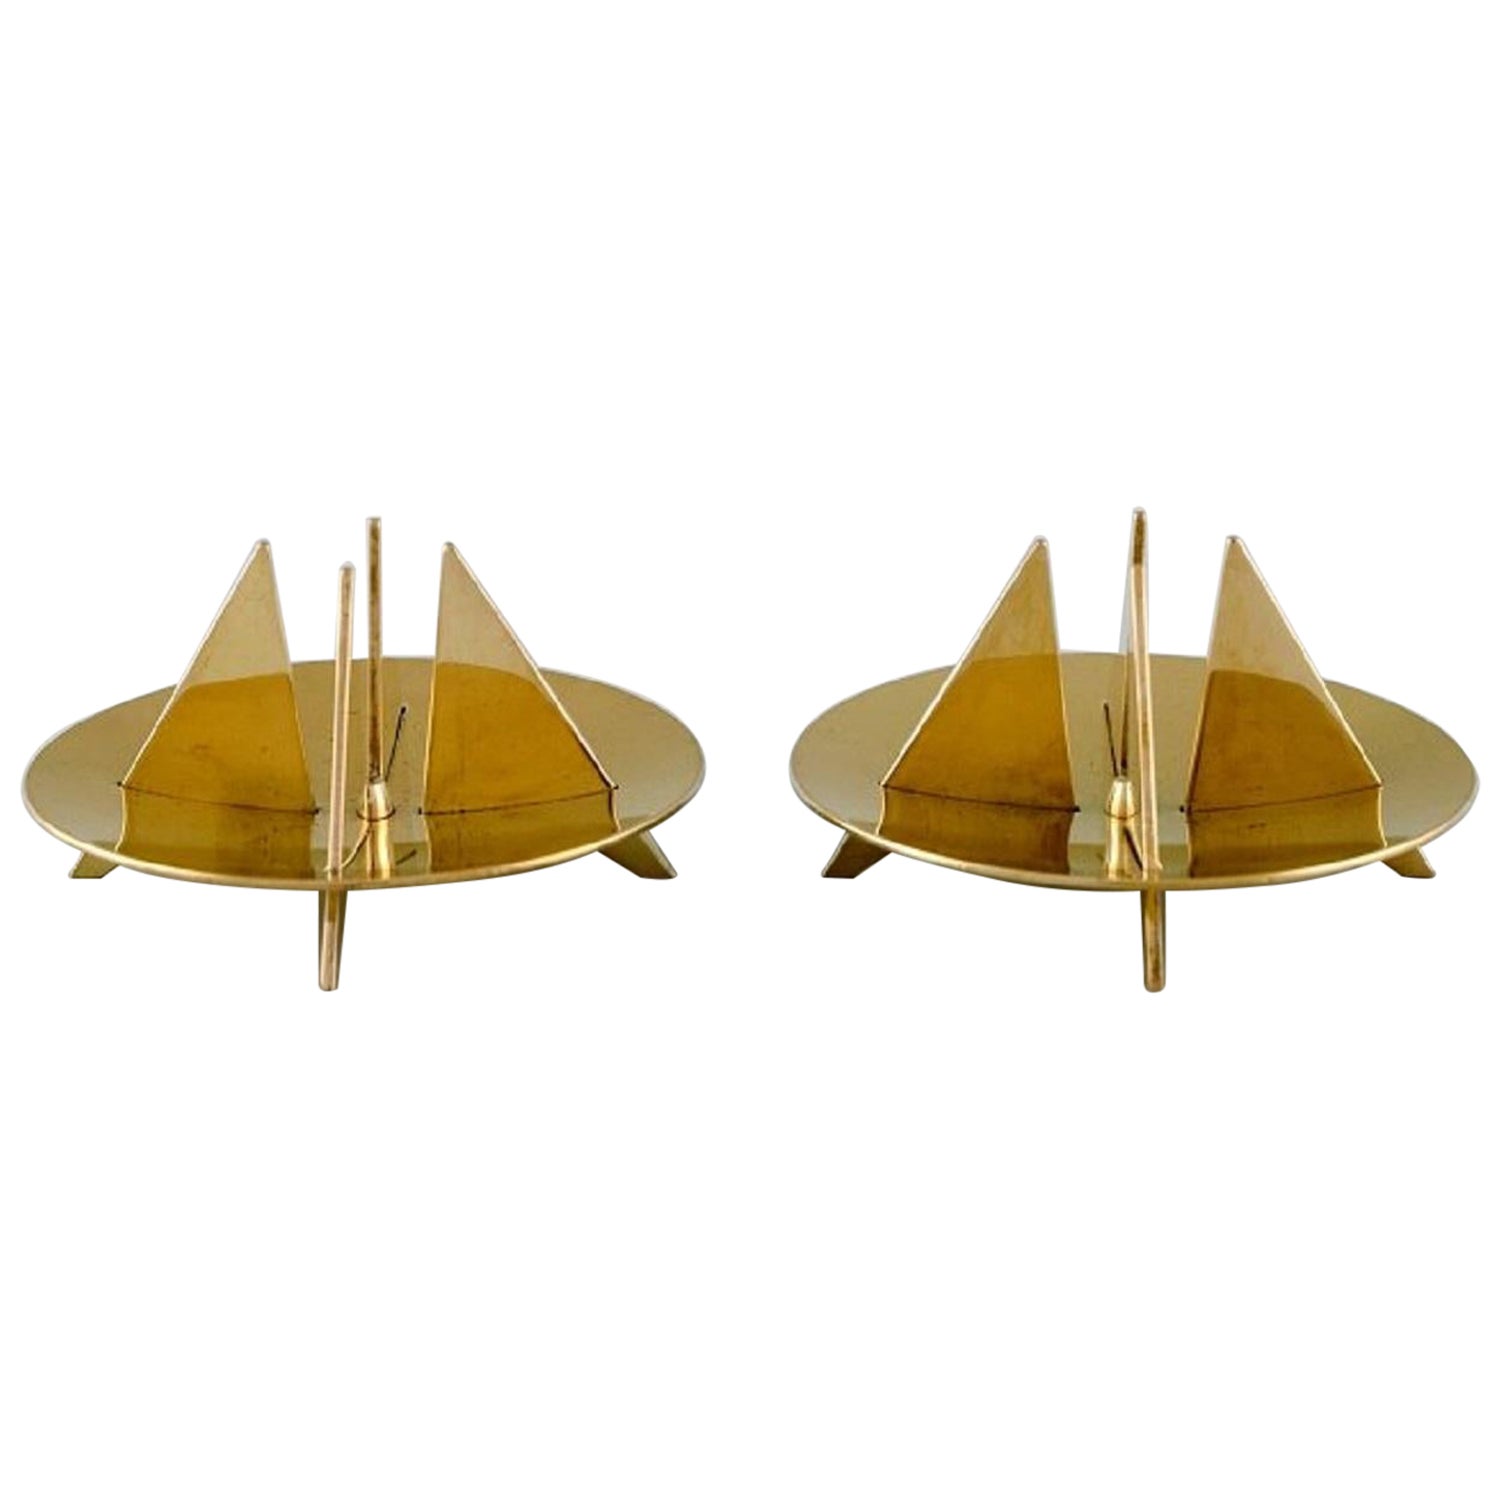 Pierre Forsell for Skultuna, a Pair of Sculptural Candlesticks For Sale at  1stDibs